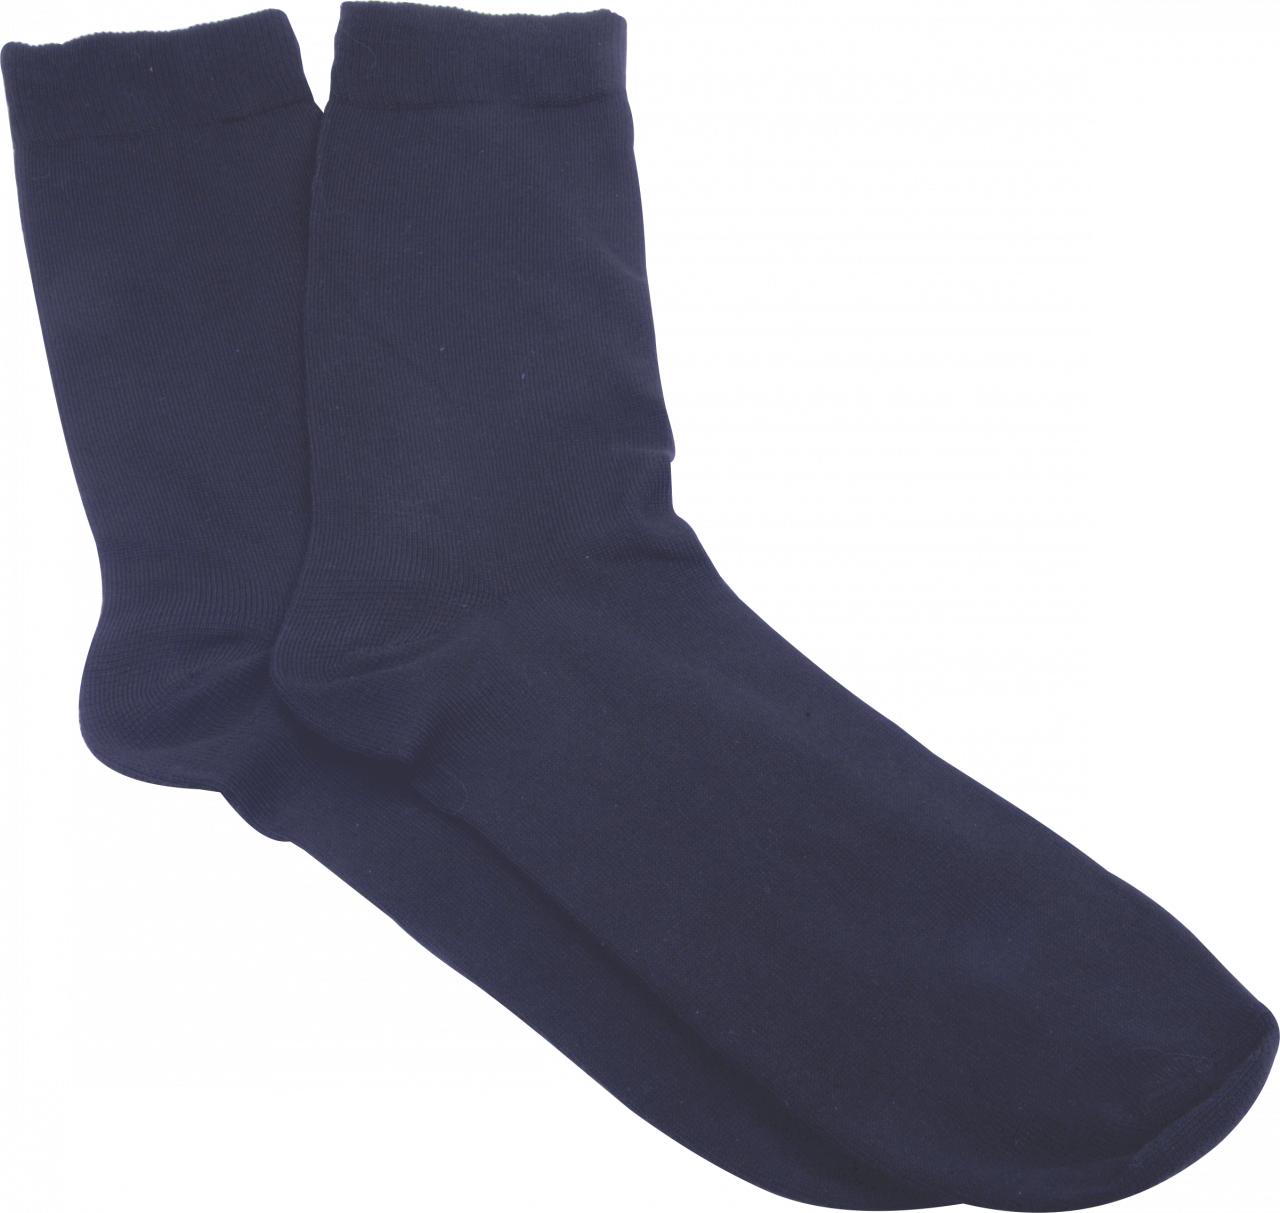 Security Socks Ankle. Avail in Black or Navy